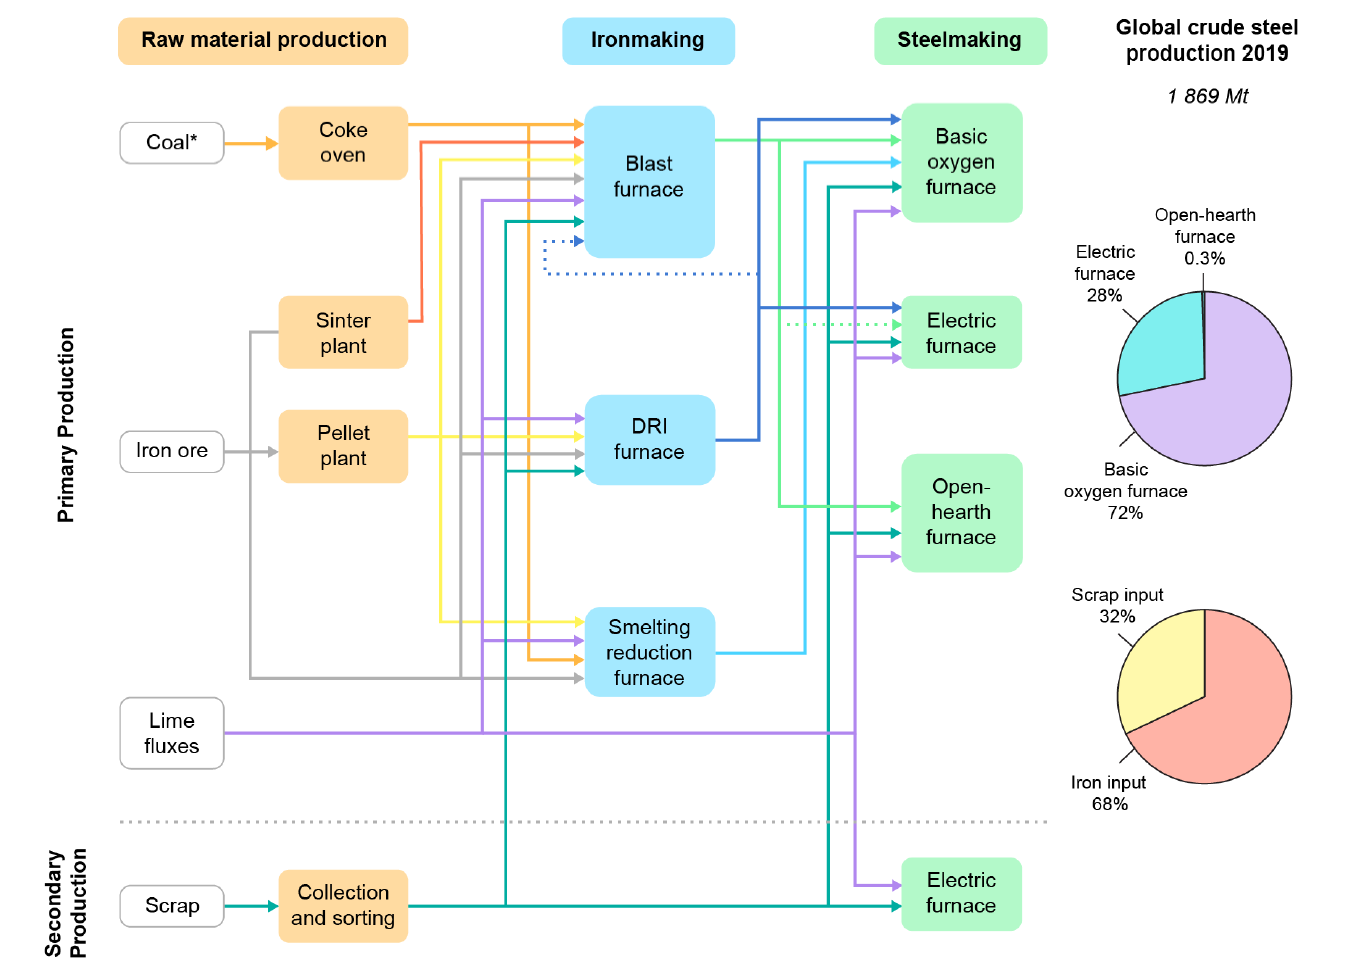 Production pathways in iron and steel